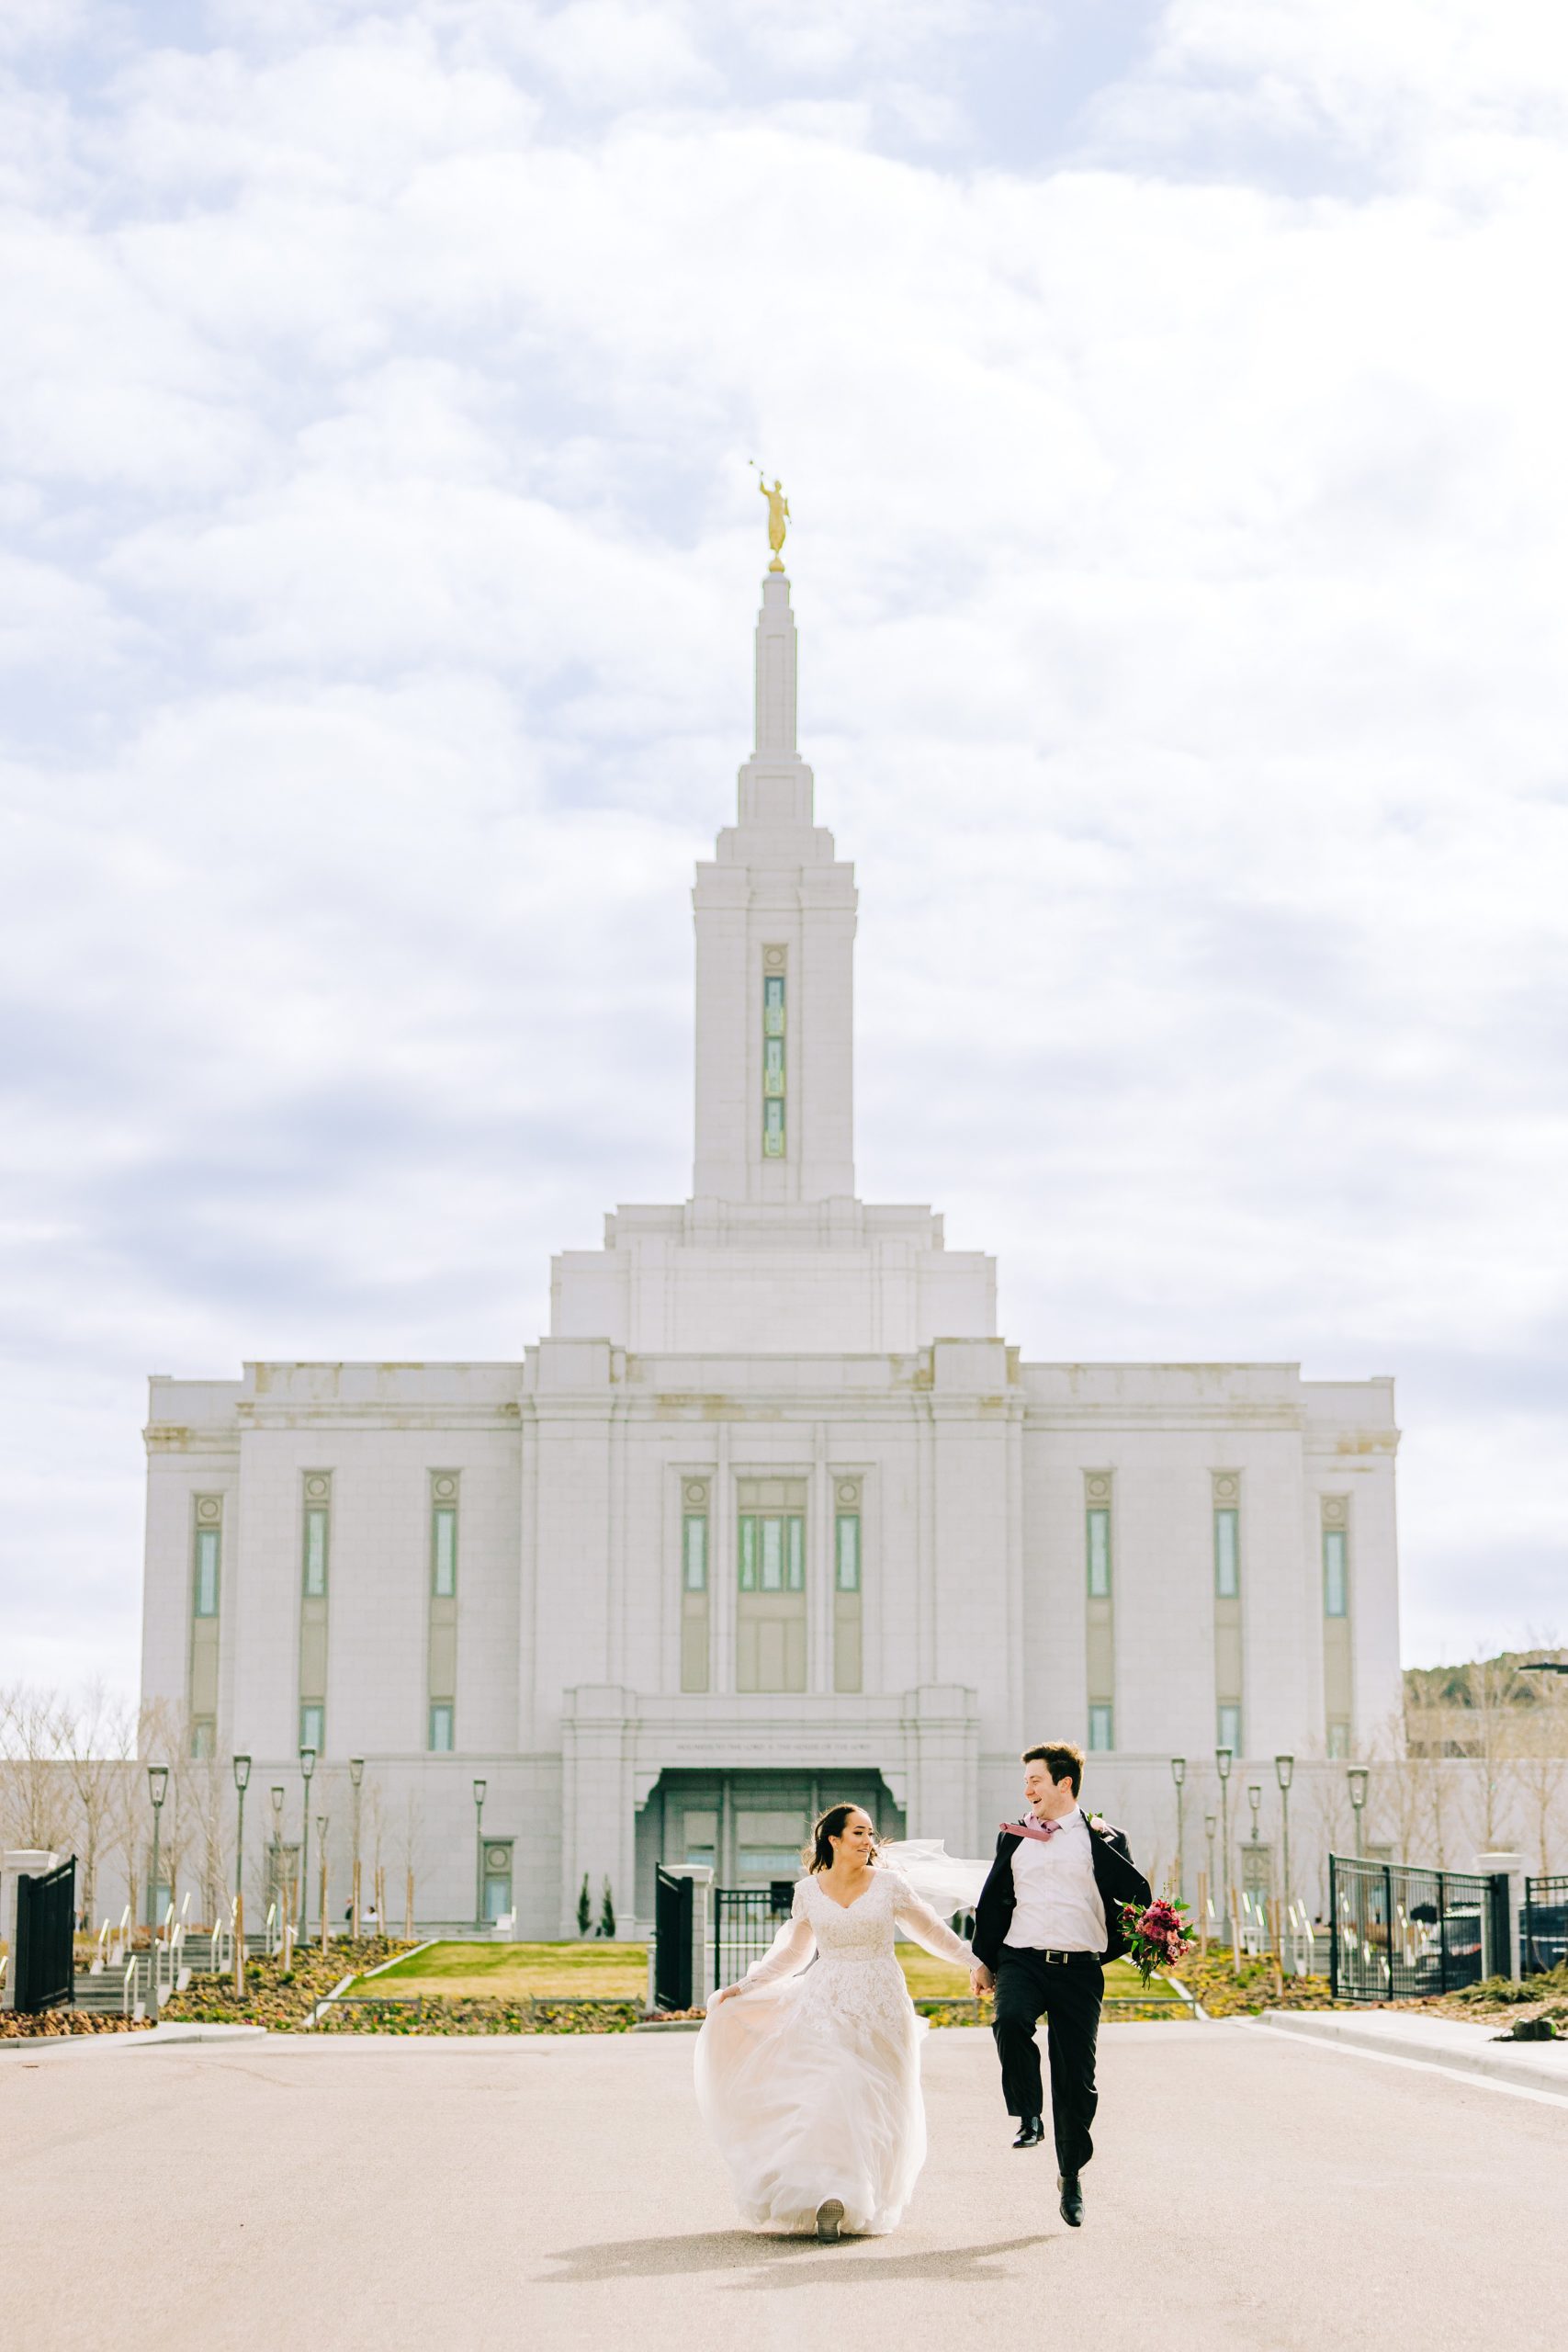 skipping down the road from the pocatello temple the bride and groom hold hands